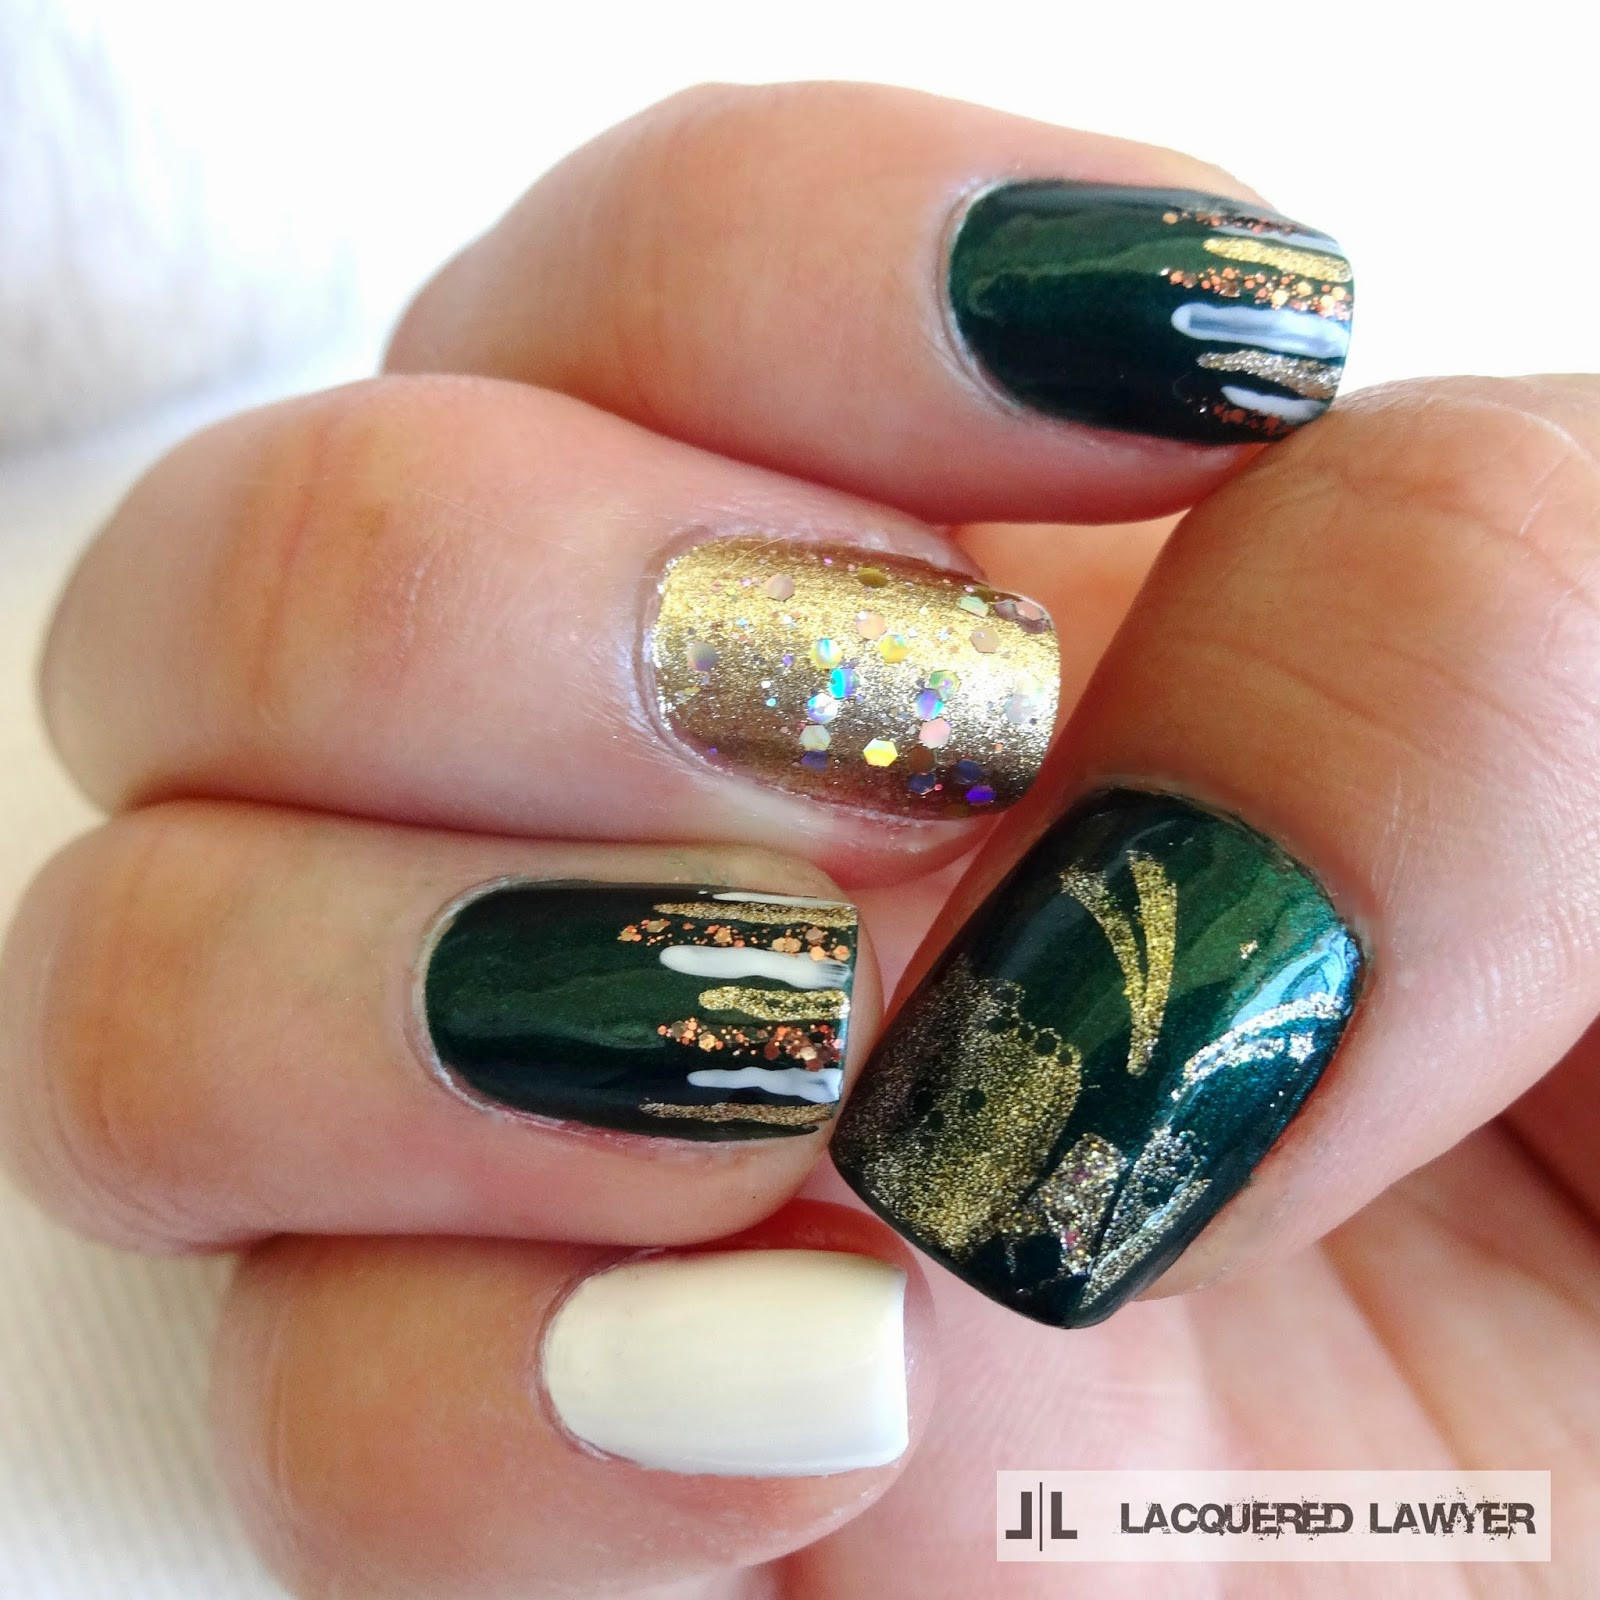 Champagne Nail Designs
 Lacquered Lawyer